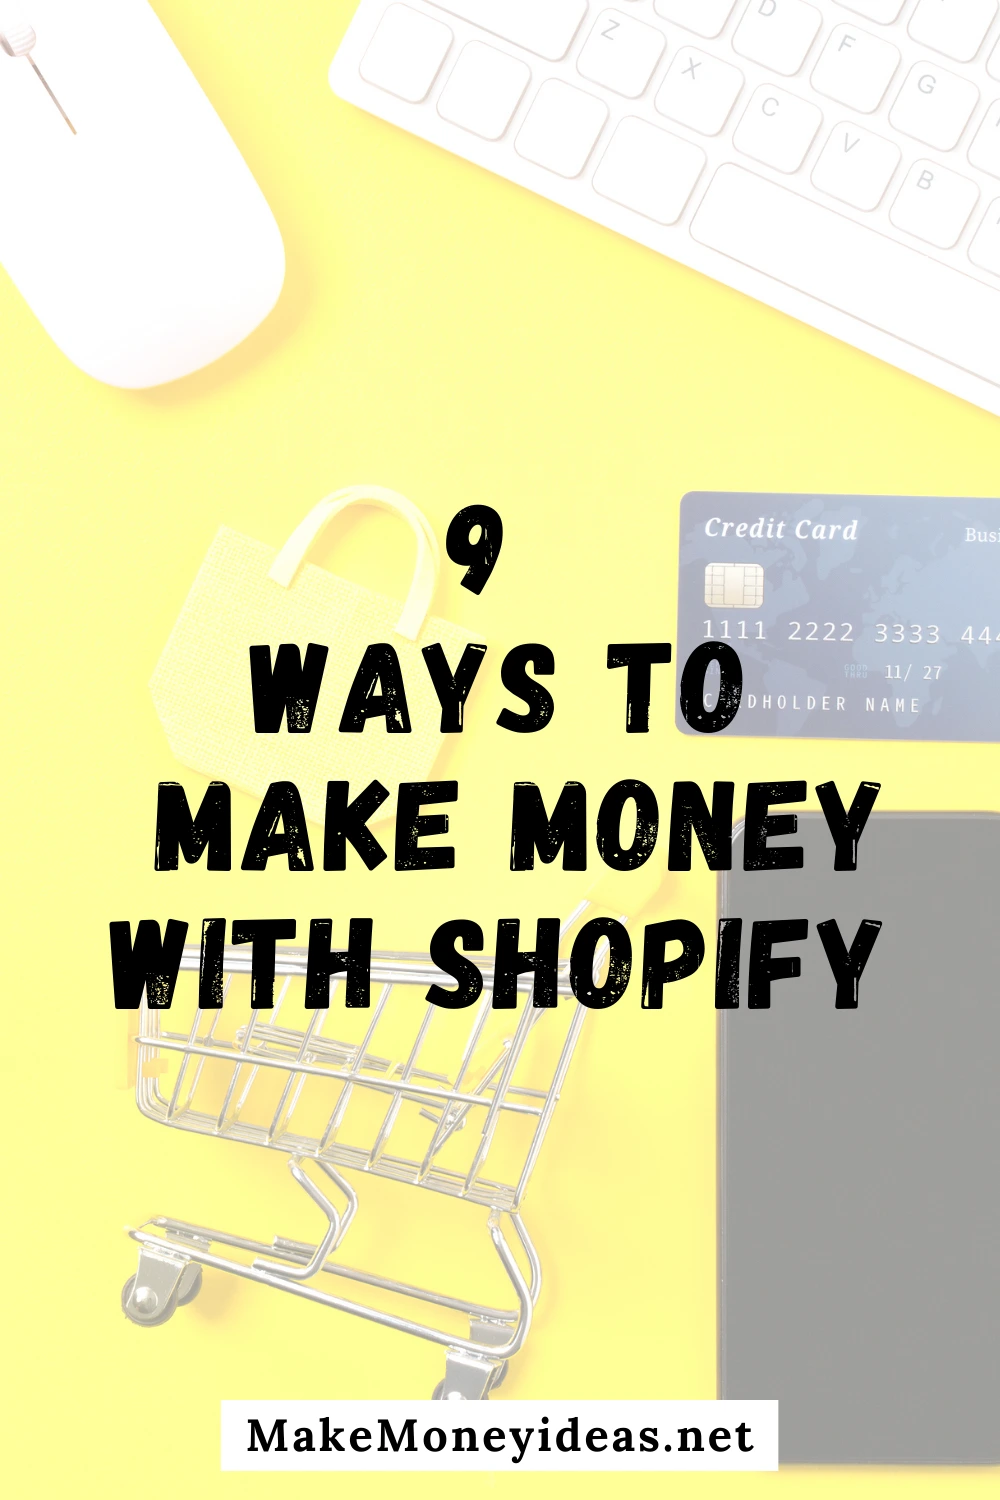 9 ways to make money with shopify